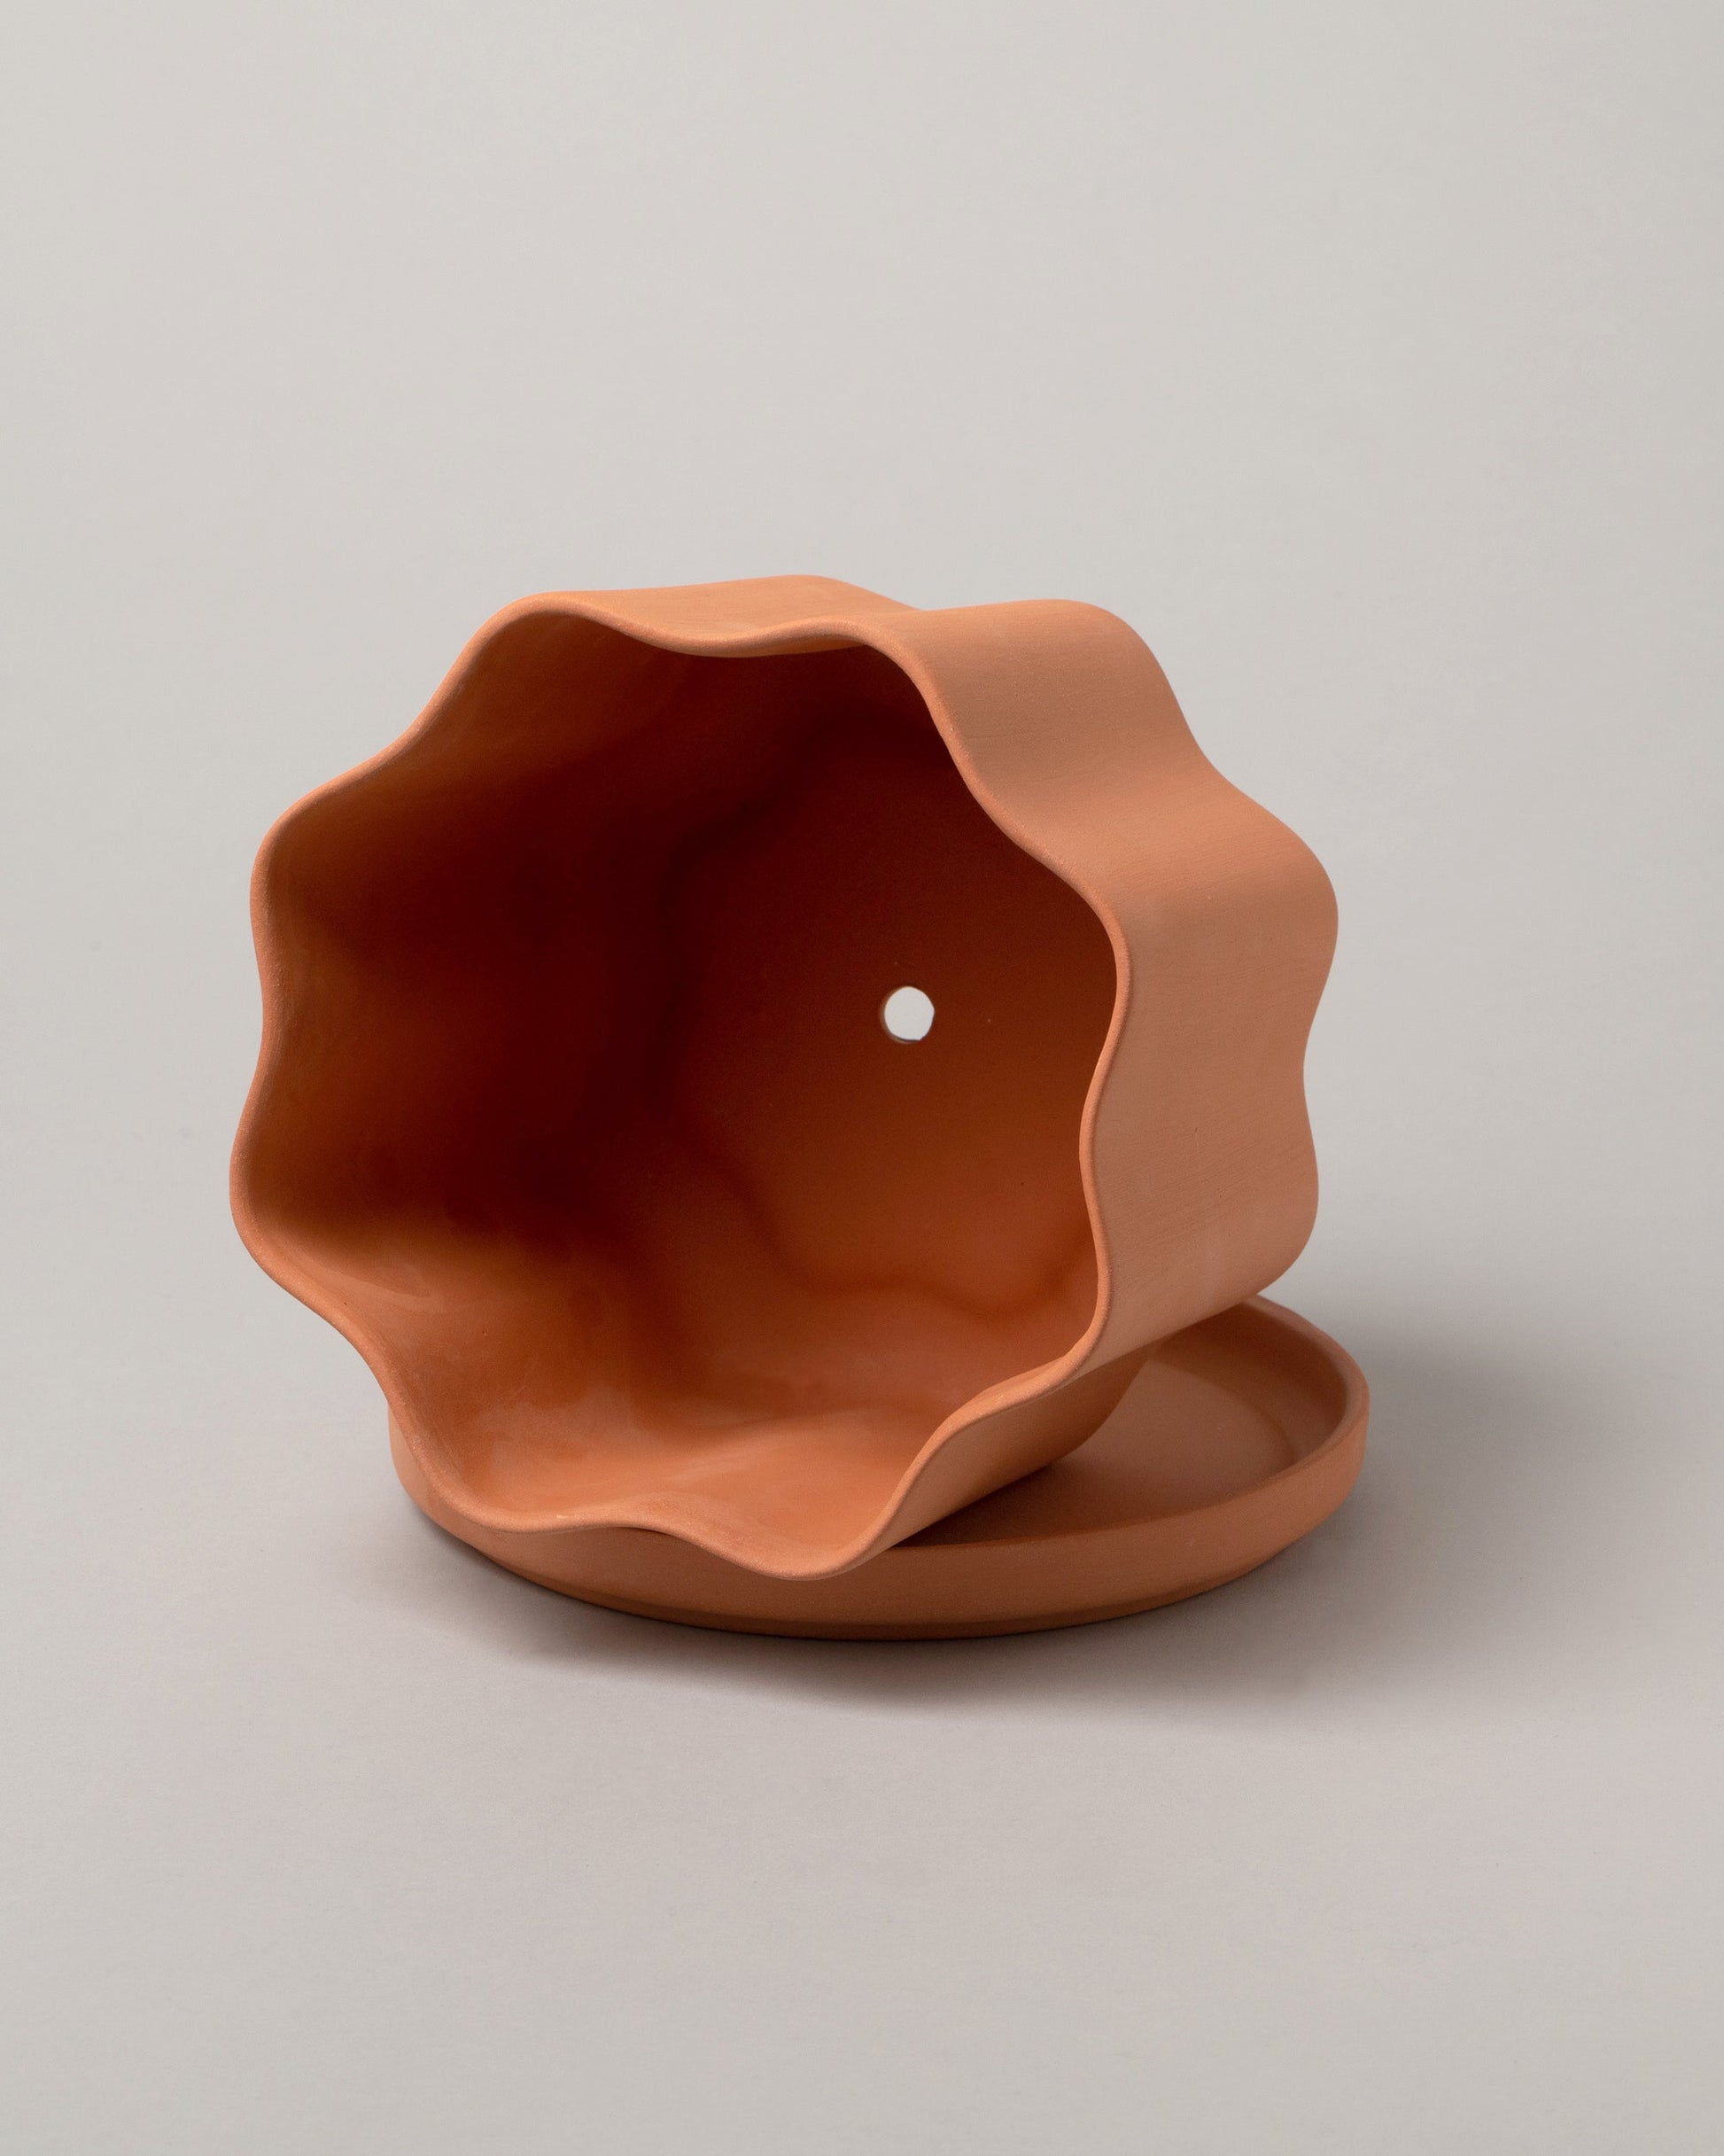 Inside view of the Peaches Terra Medium Wavy Planter on light color background.